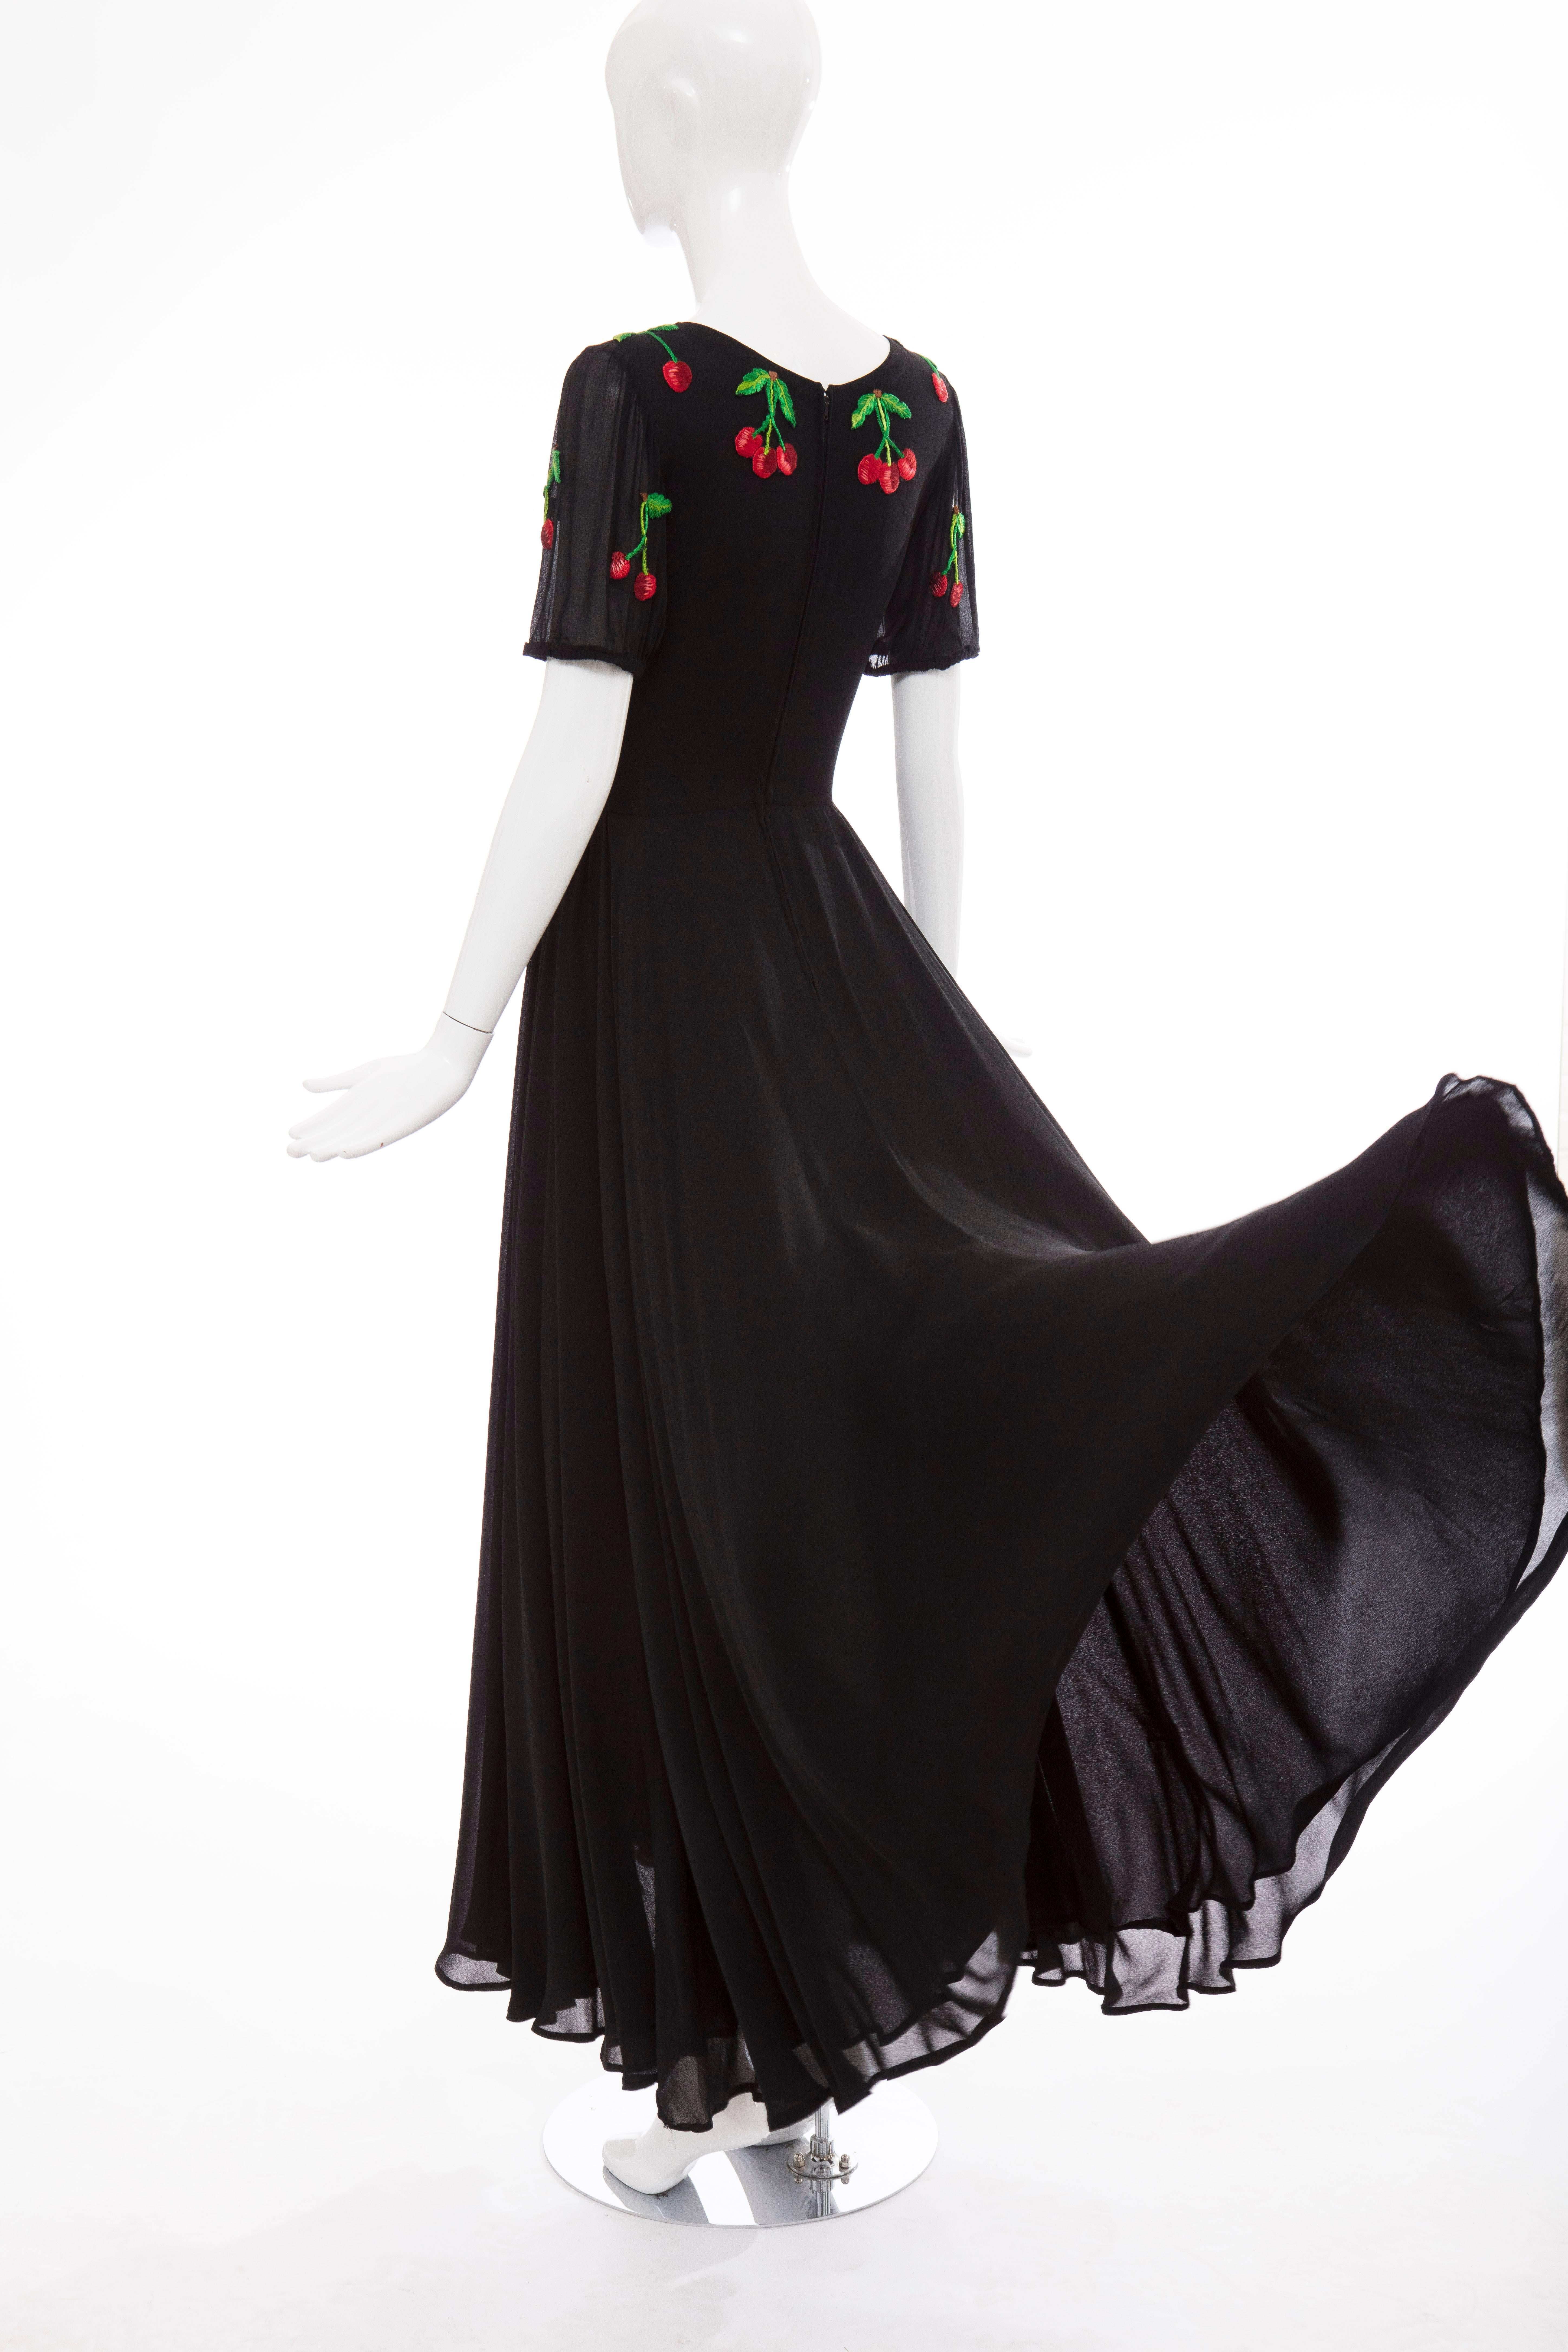 Valentino Black Crepe Evening Dress With Hand Embroidered Cherries, Circa 1970's 4